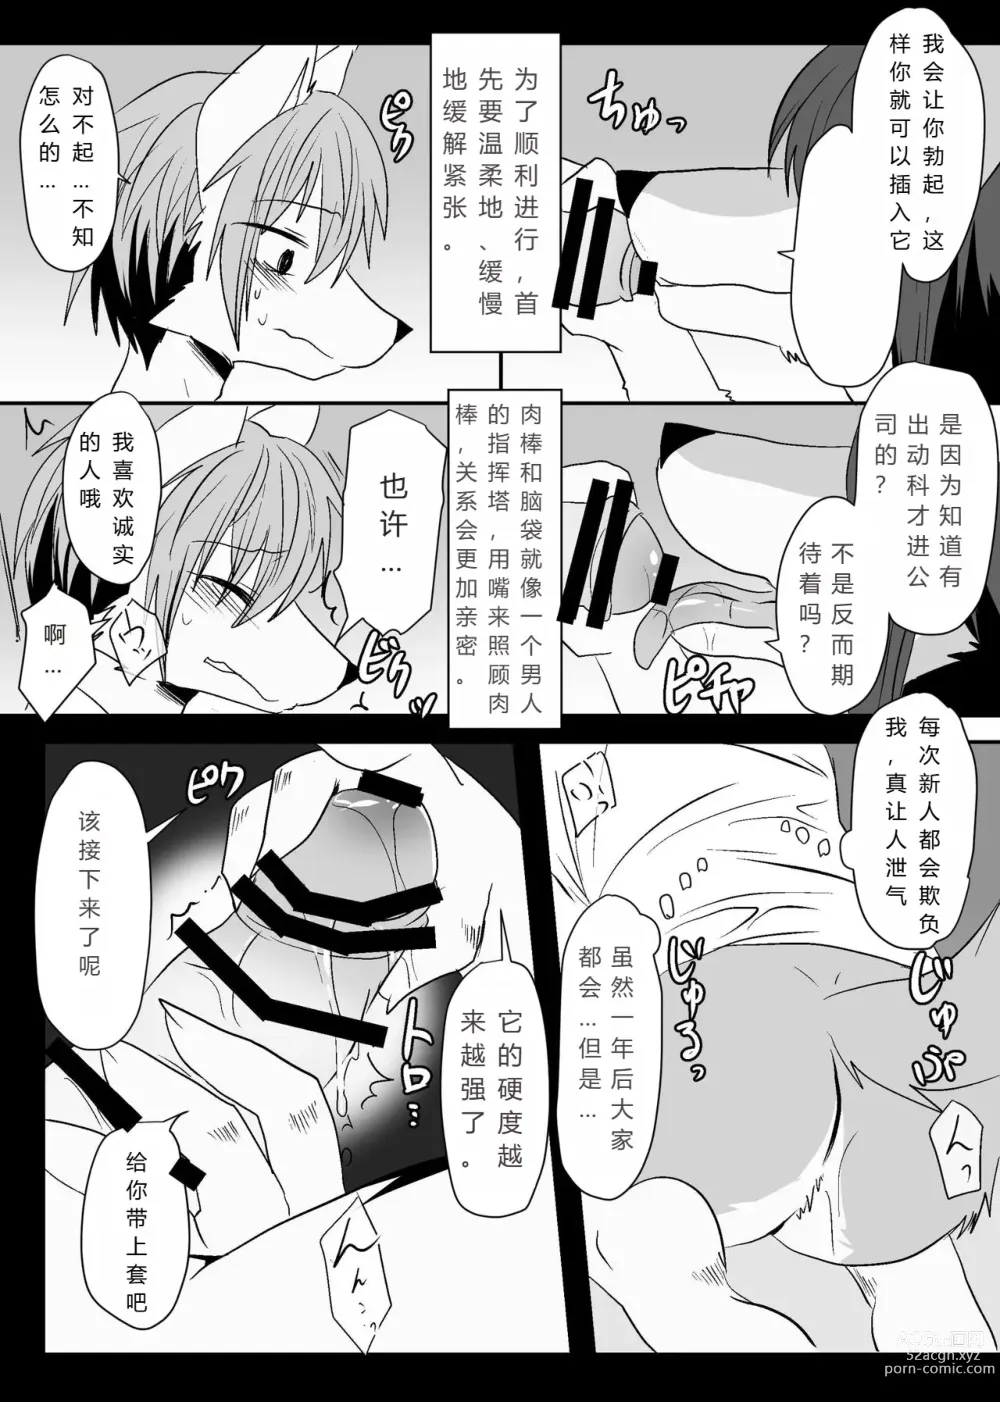 Page 8 of doujinshi 我们要上班吗？